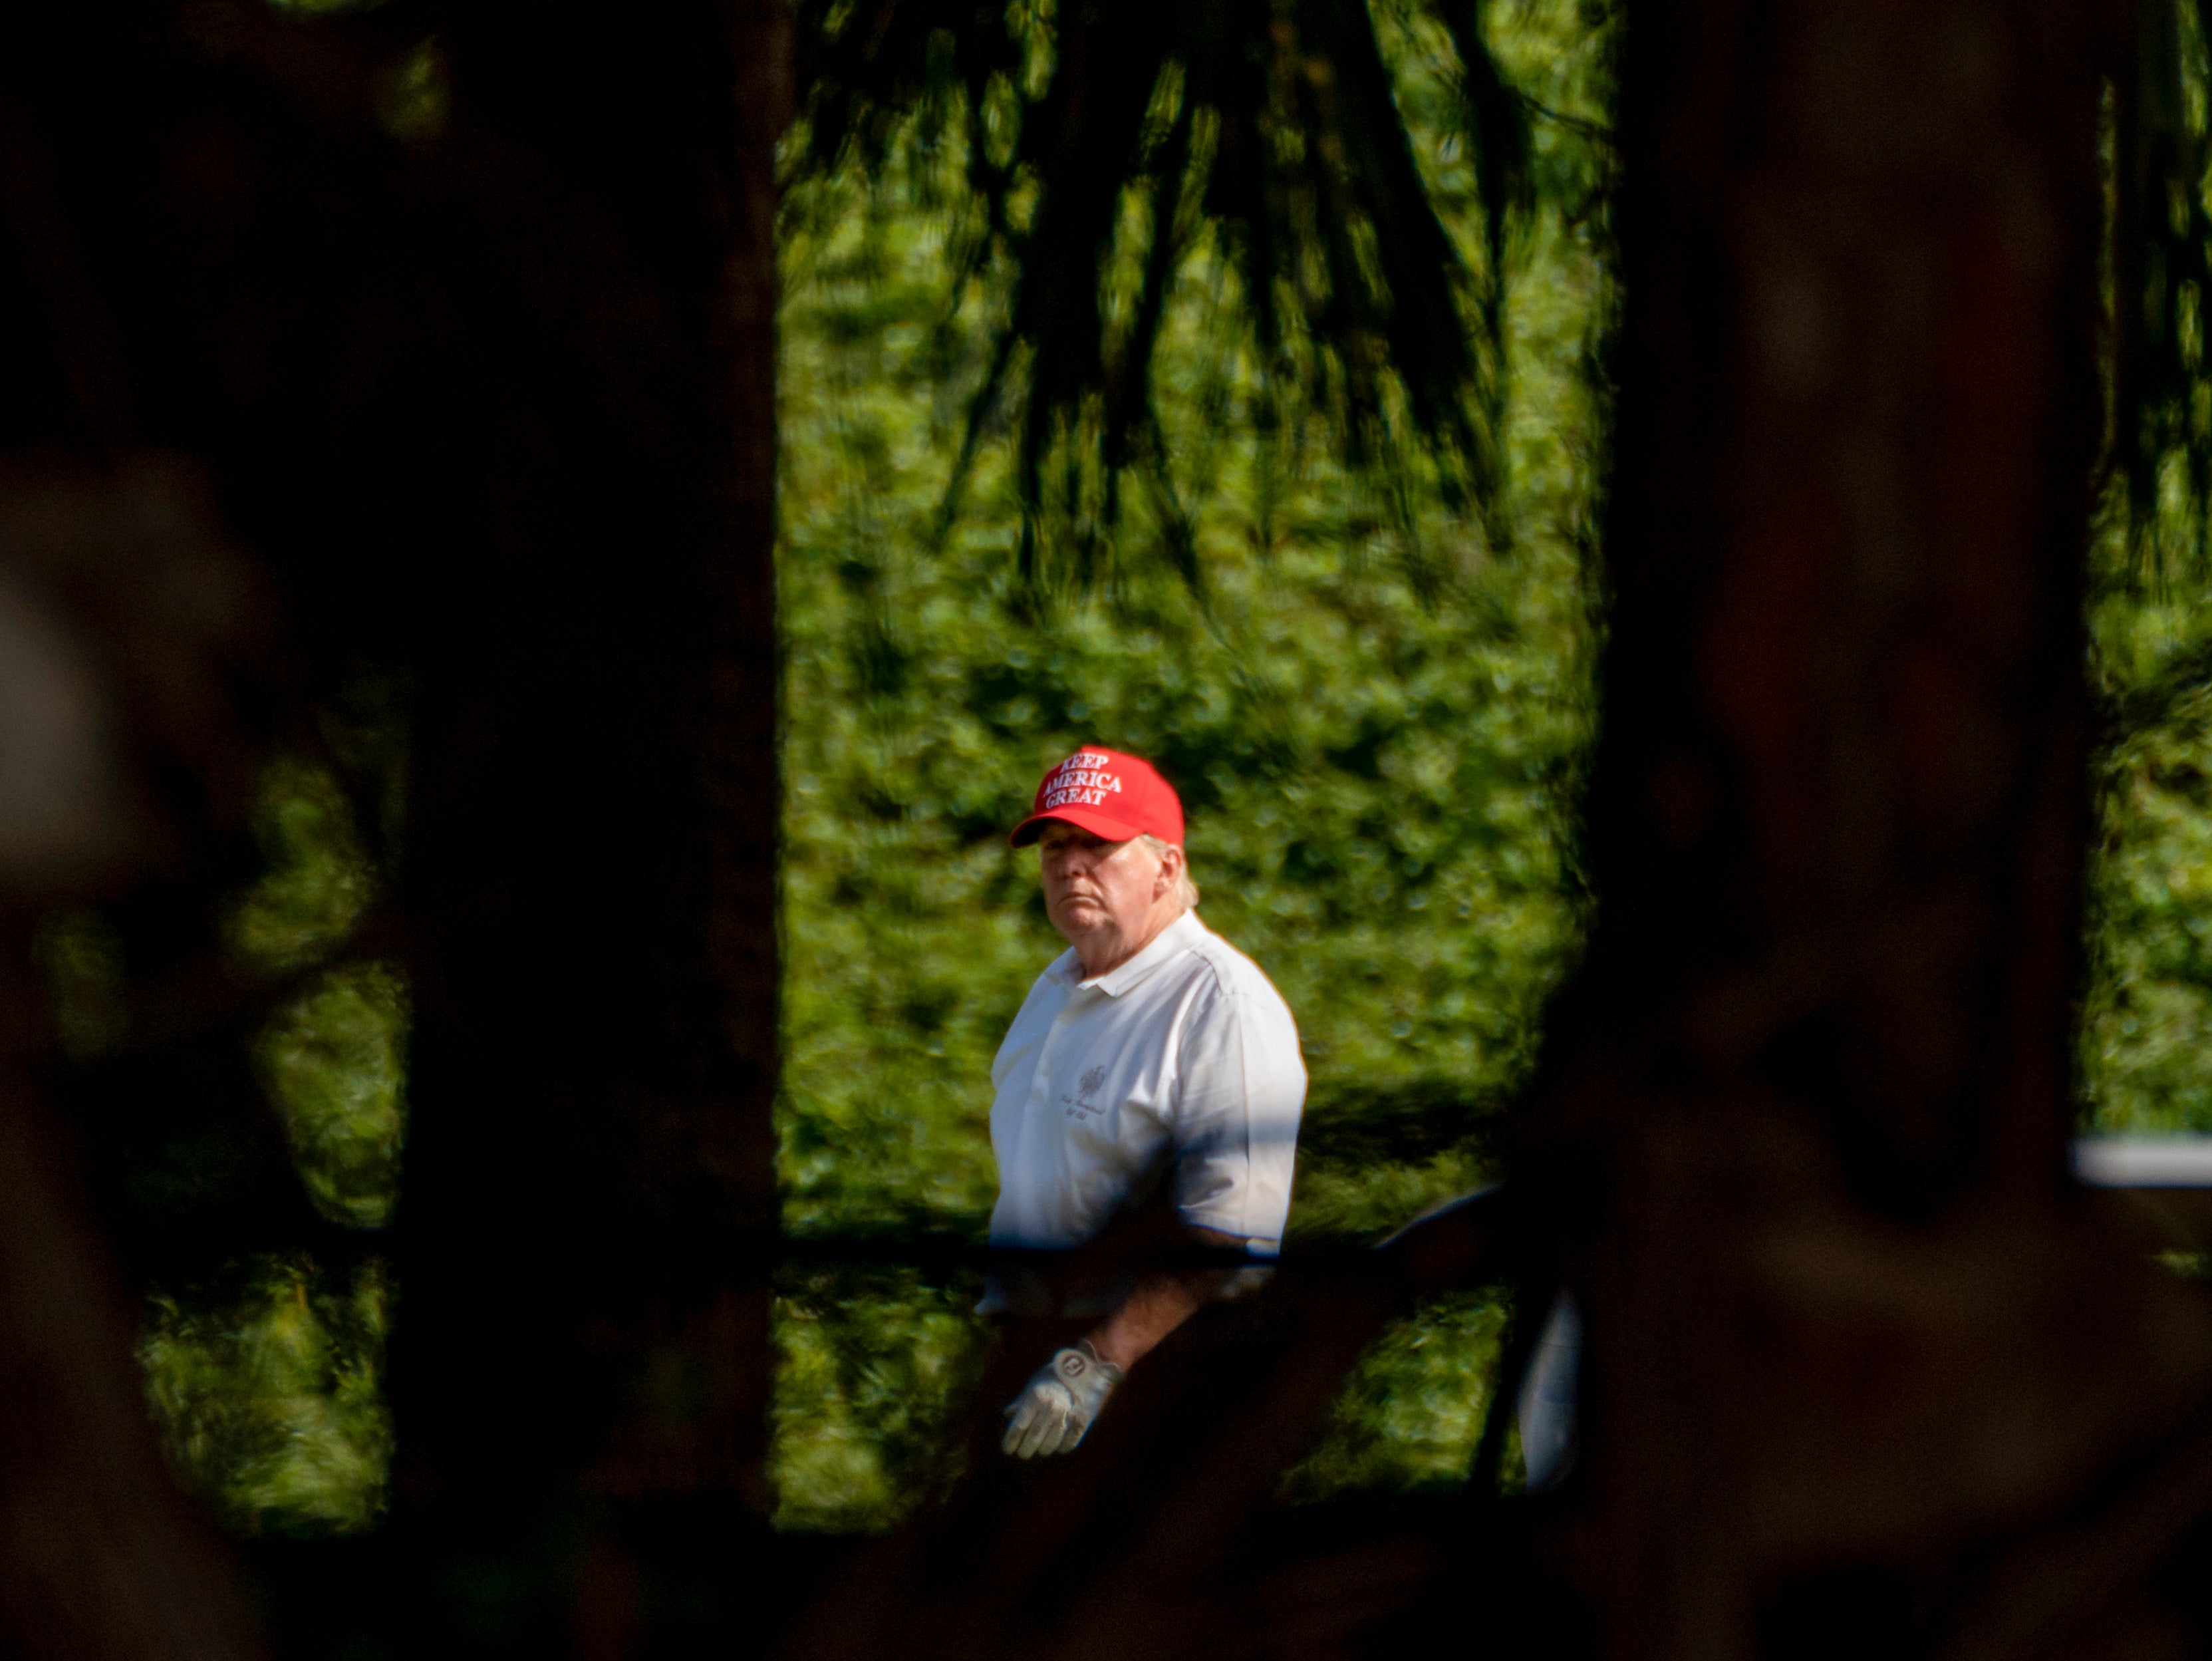 Donald Trump on the golf course in Florida